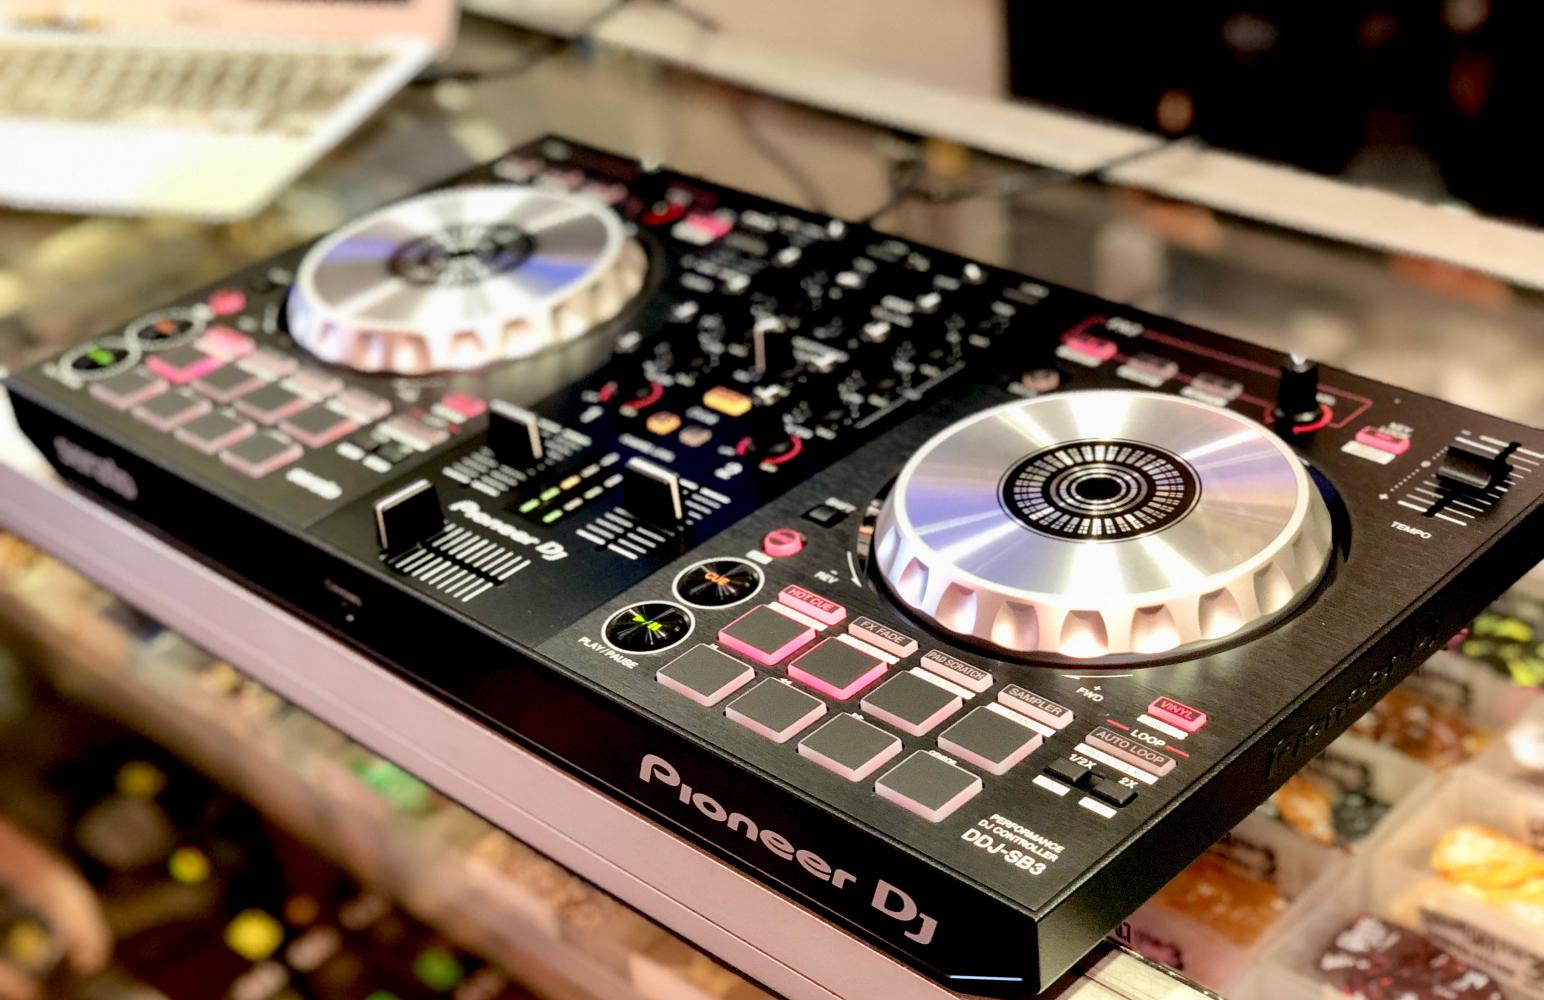 Reasons to get a DJ controller for beginners